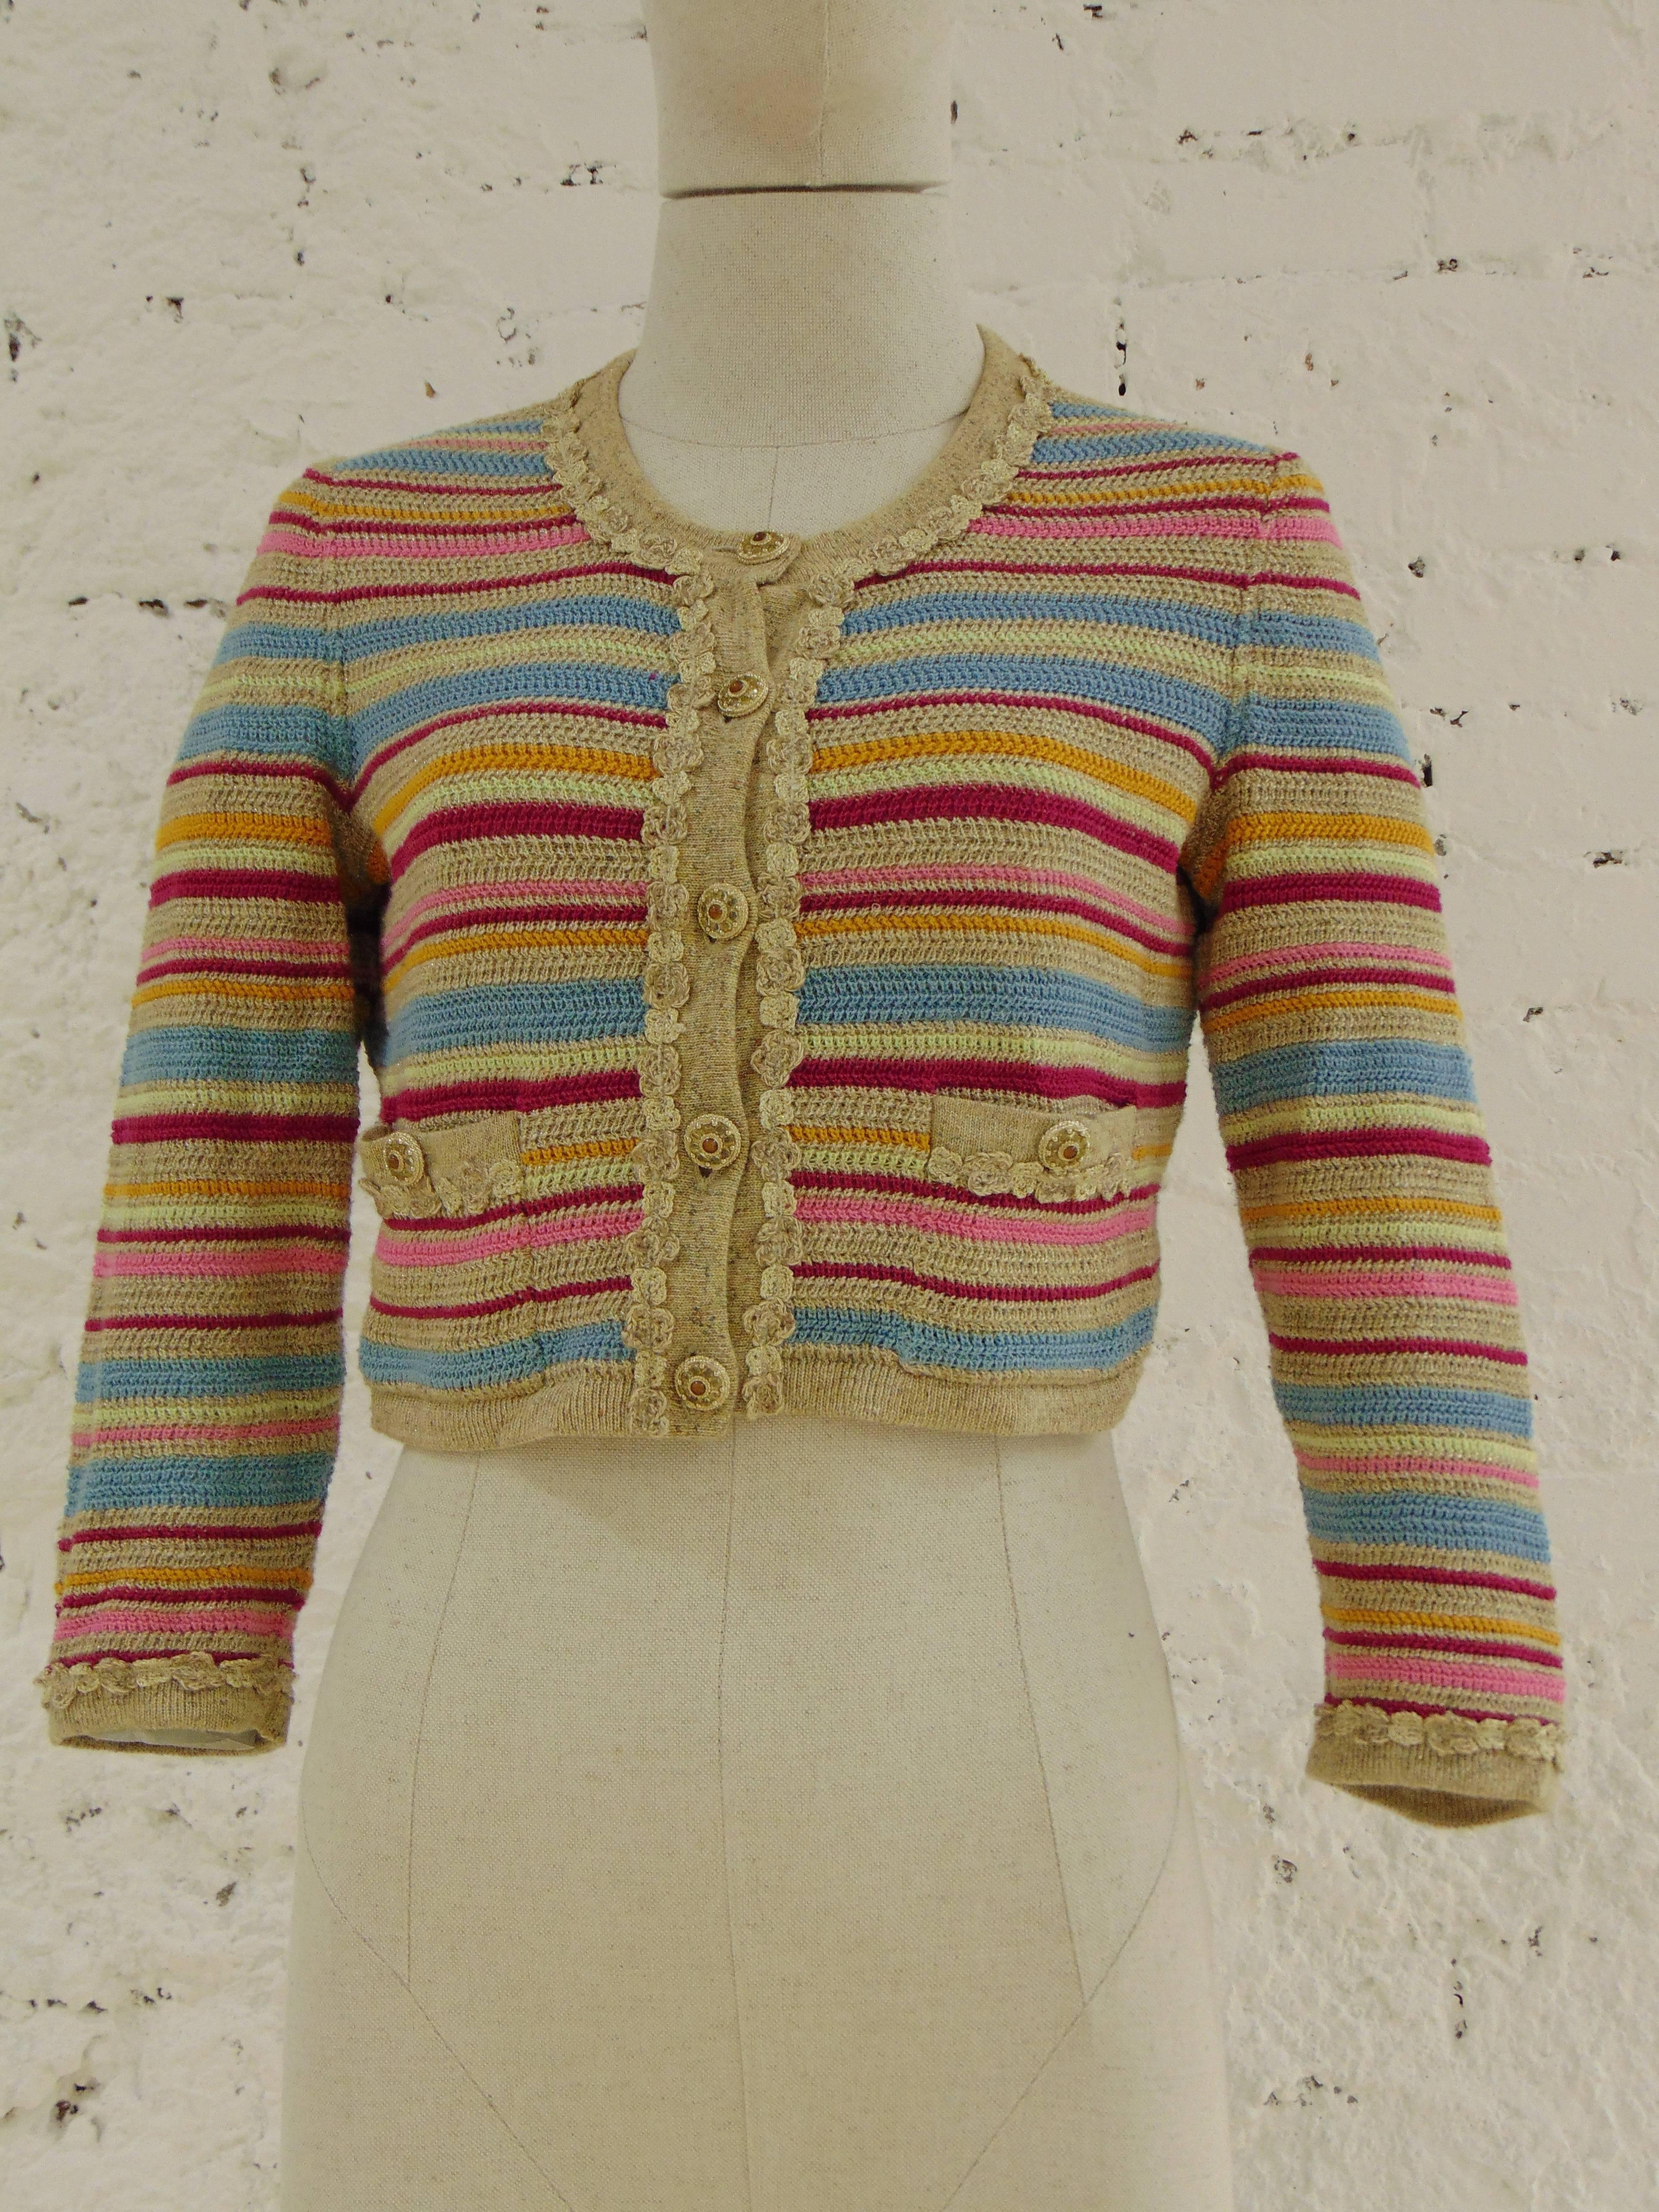 Chanel multicoloured cotton cardigan

Beije, light blu, fucsia and yellow multicoloured cardigan totally made in france in size 40 embellished with gold tone hardware with semi precious stones